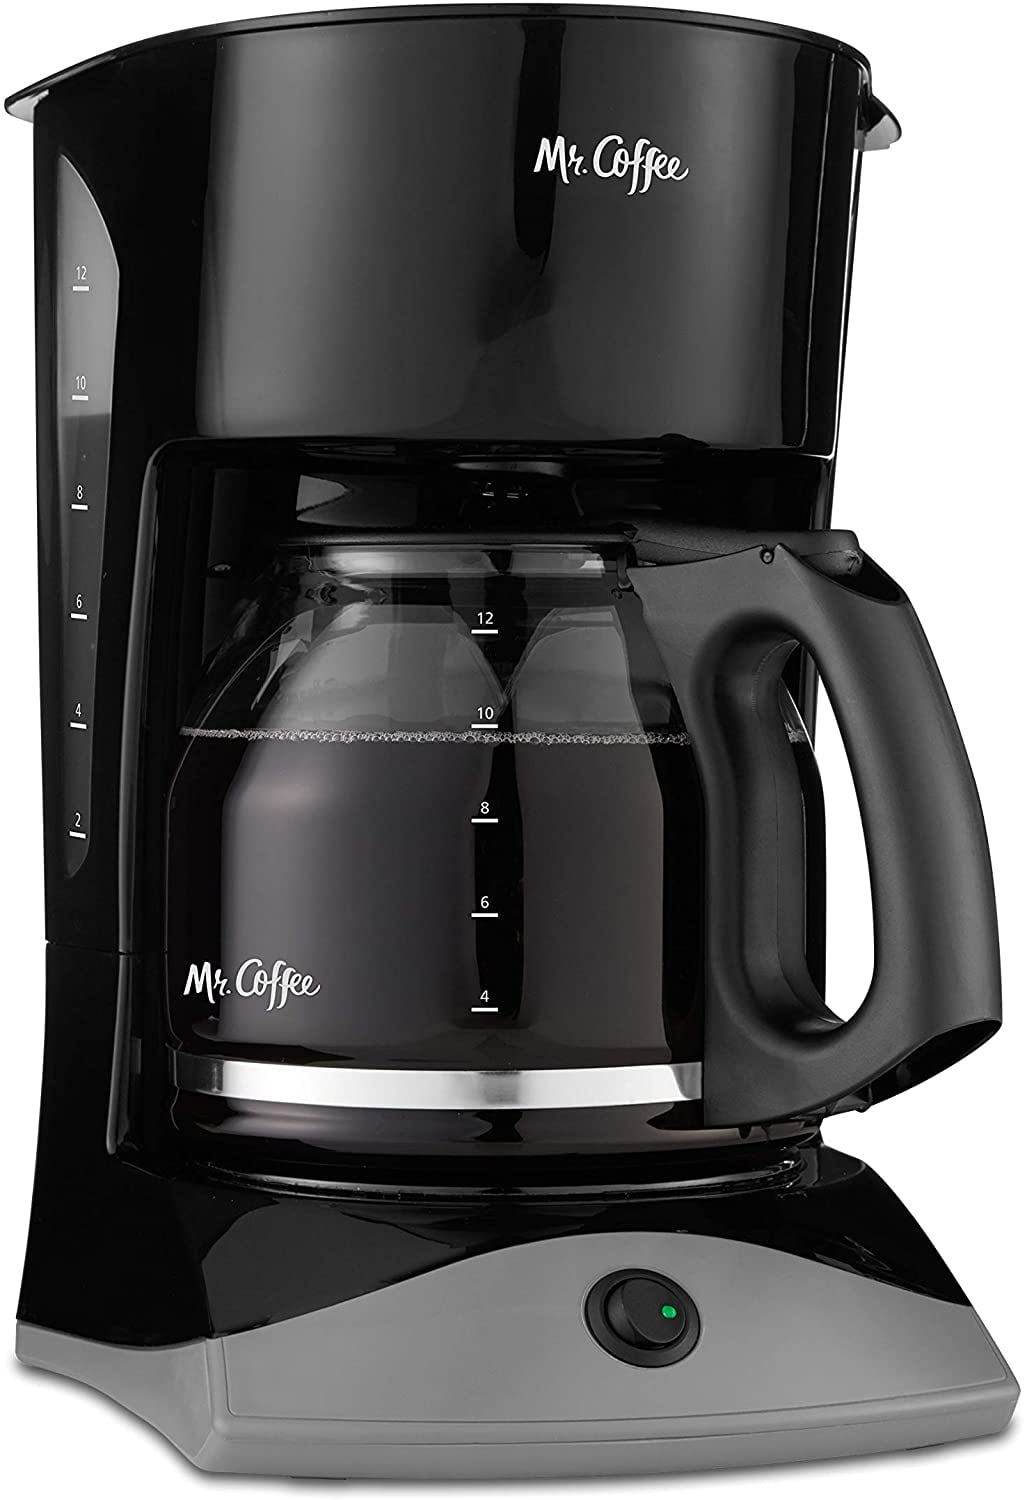 The Ratio Eight coffee maker